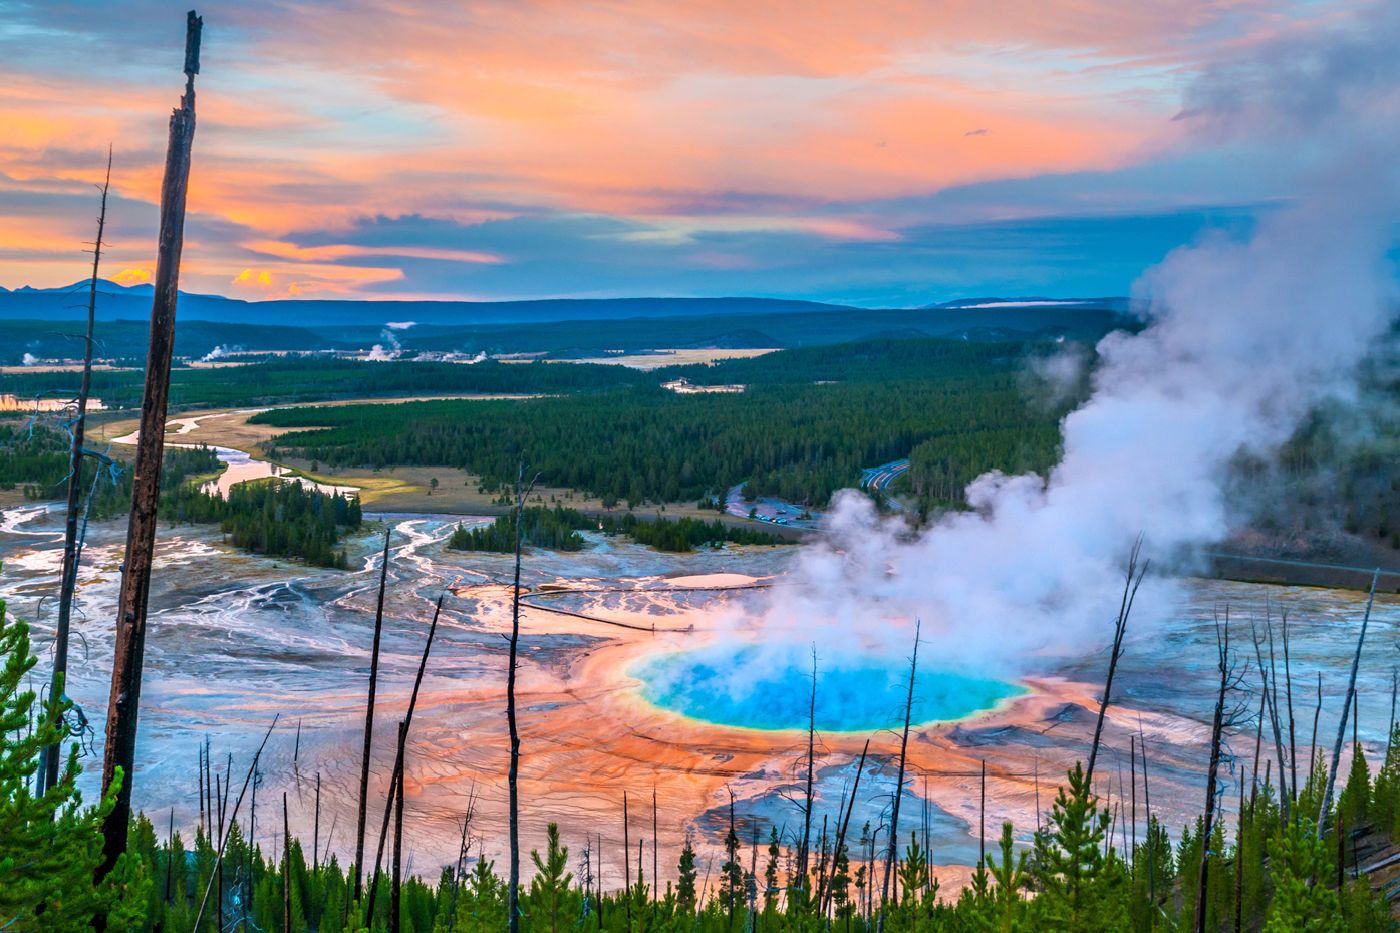 38 BEST THINGS TO DO IN YELLOWSTONE NATIONAL PARK